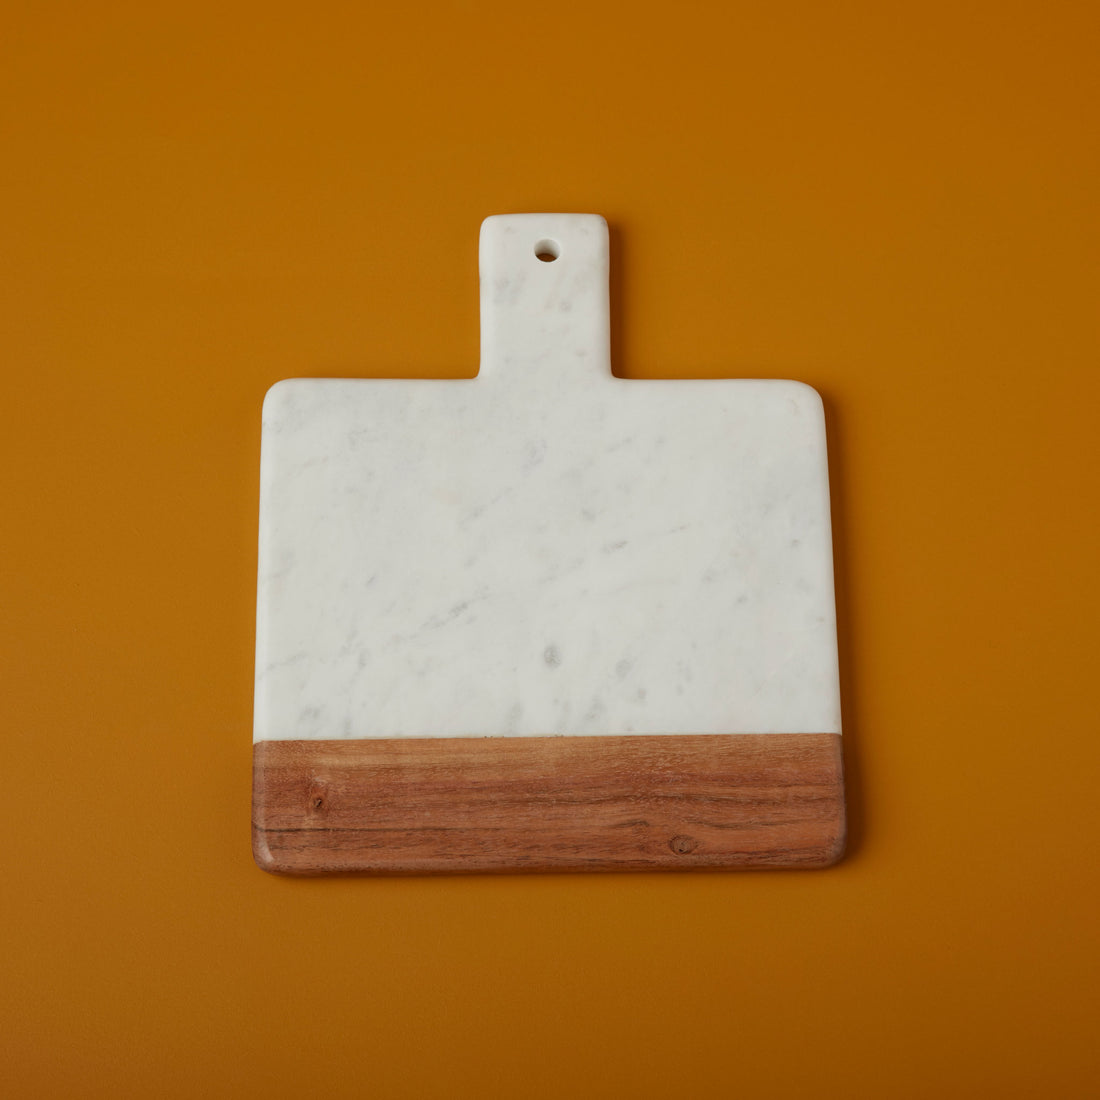 https://cdn.shopify.com/s/files/1/0376/0920/9900/products/Be-Home_White-Marble-and-Acacia-Wood-Square-Handled-Board_58-65.jpg?v=1612978274&width=1100